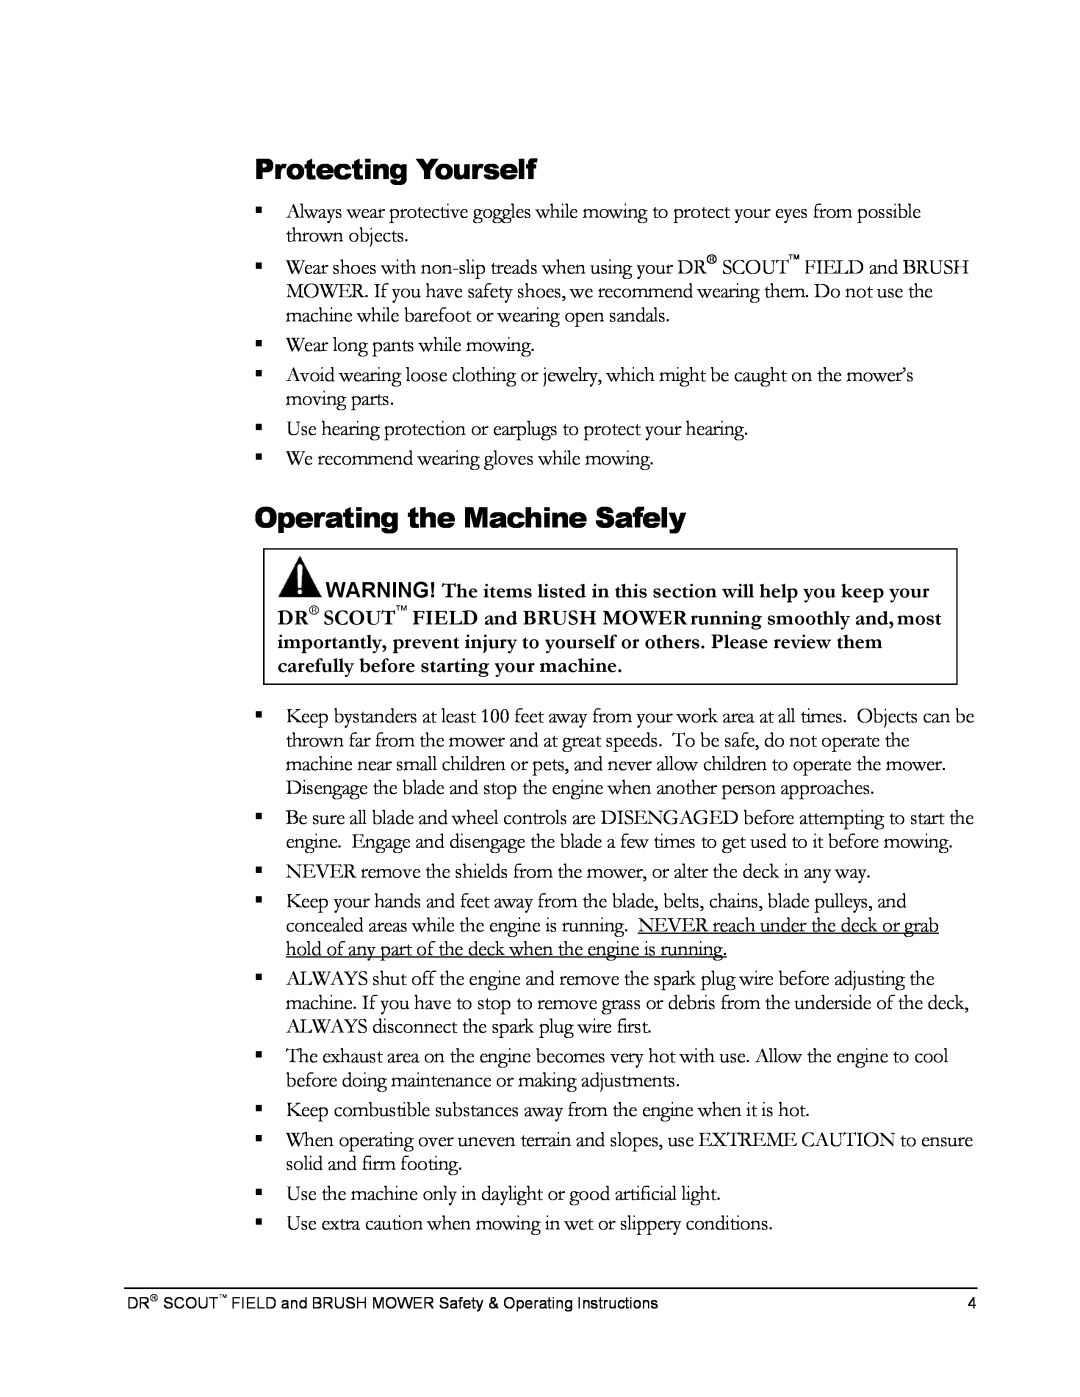 Country Home Products DR SCOUT FIELD and BRUSH MOWER manual Protecting Yourself, Operating the Machine Safely 